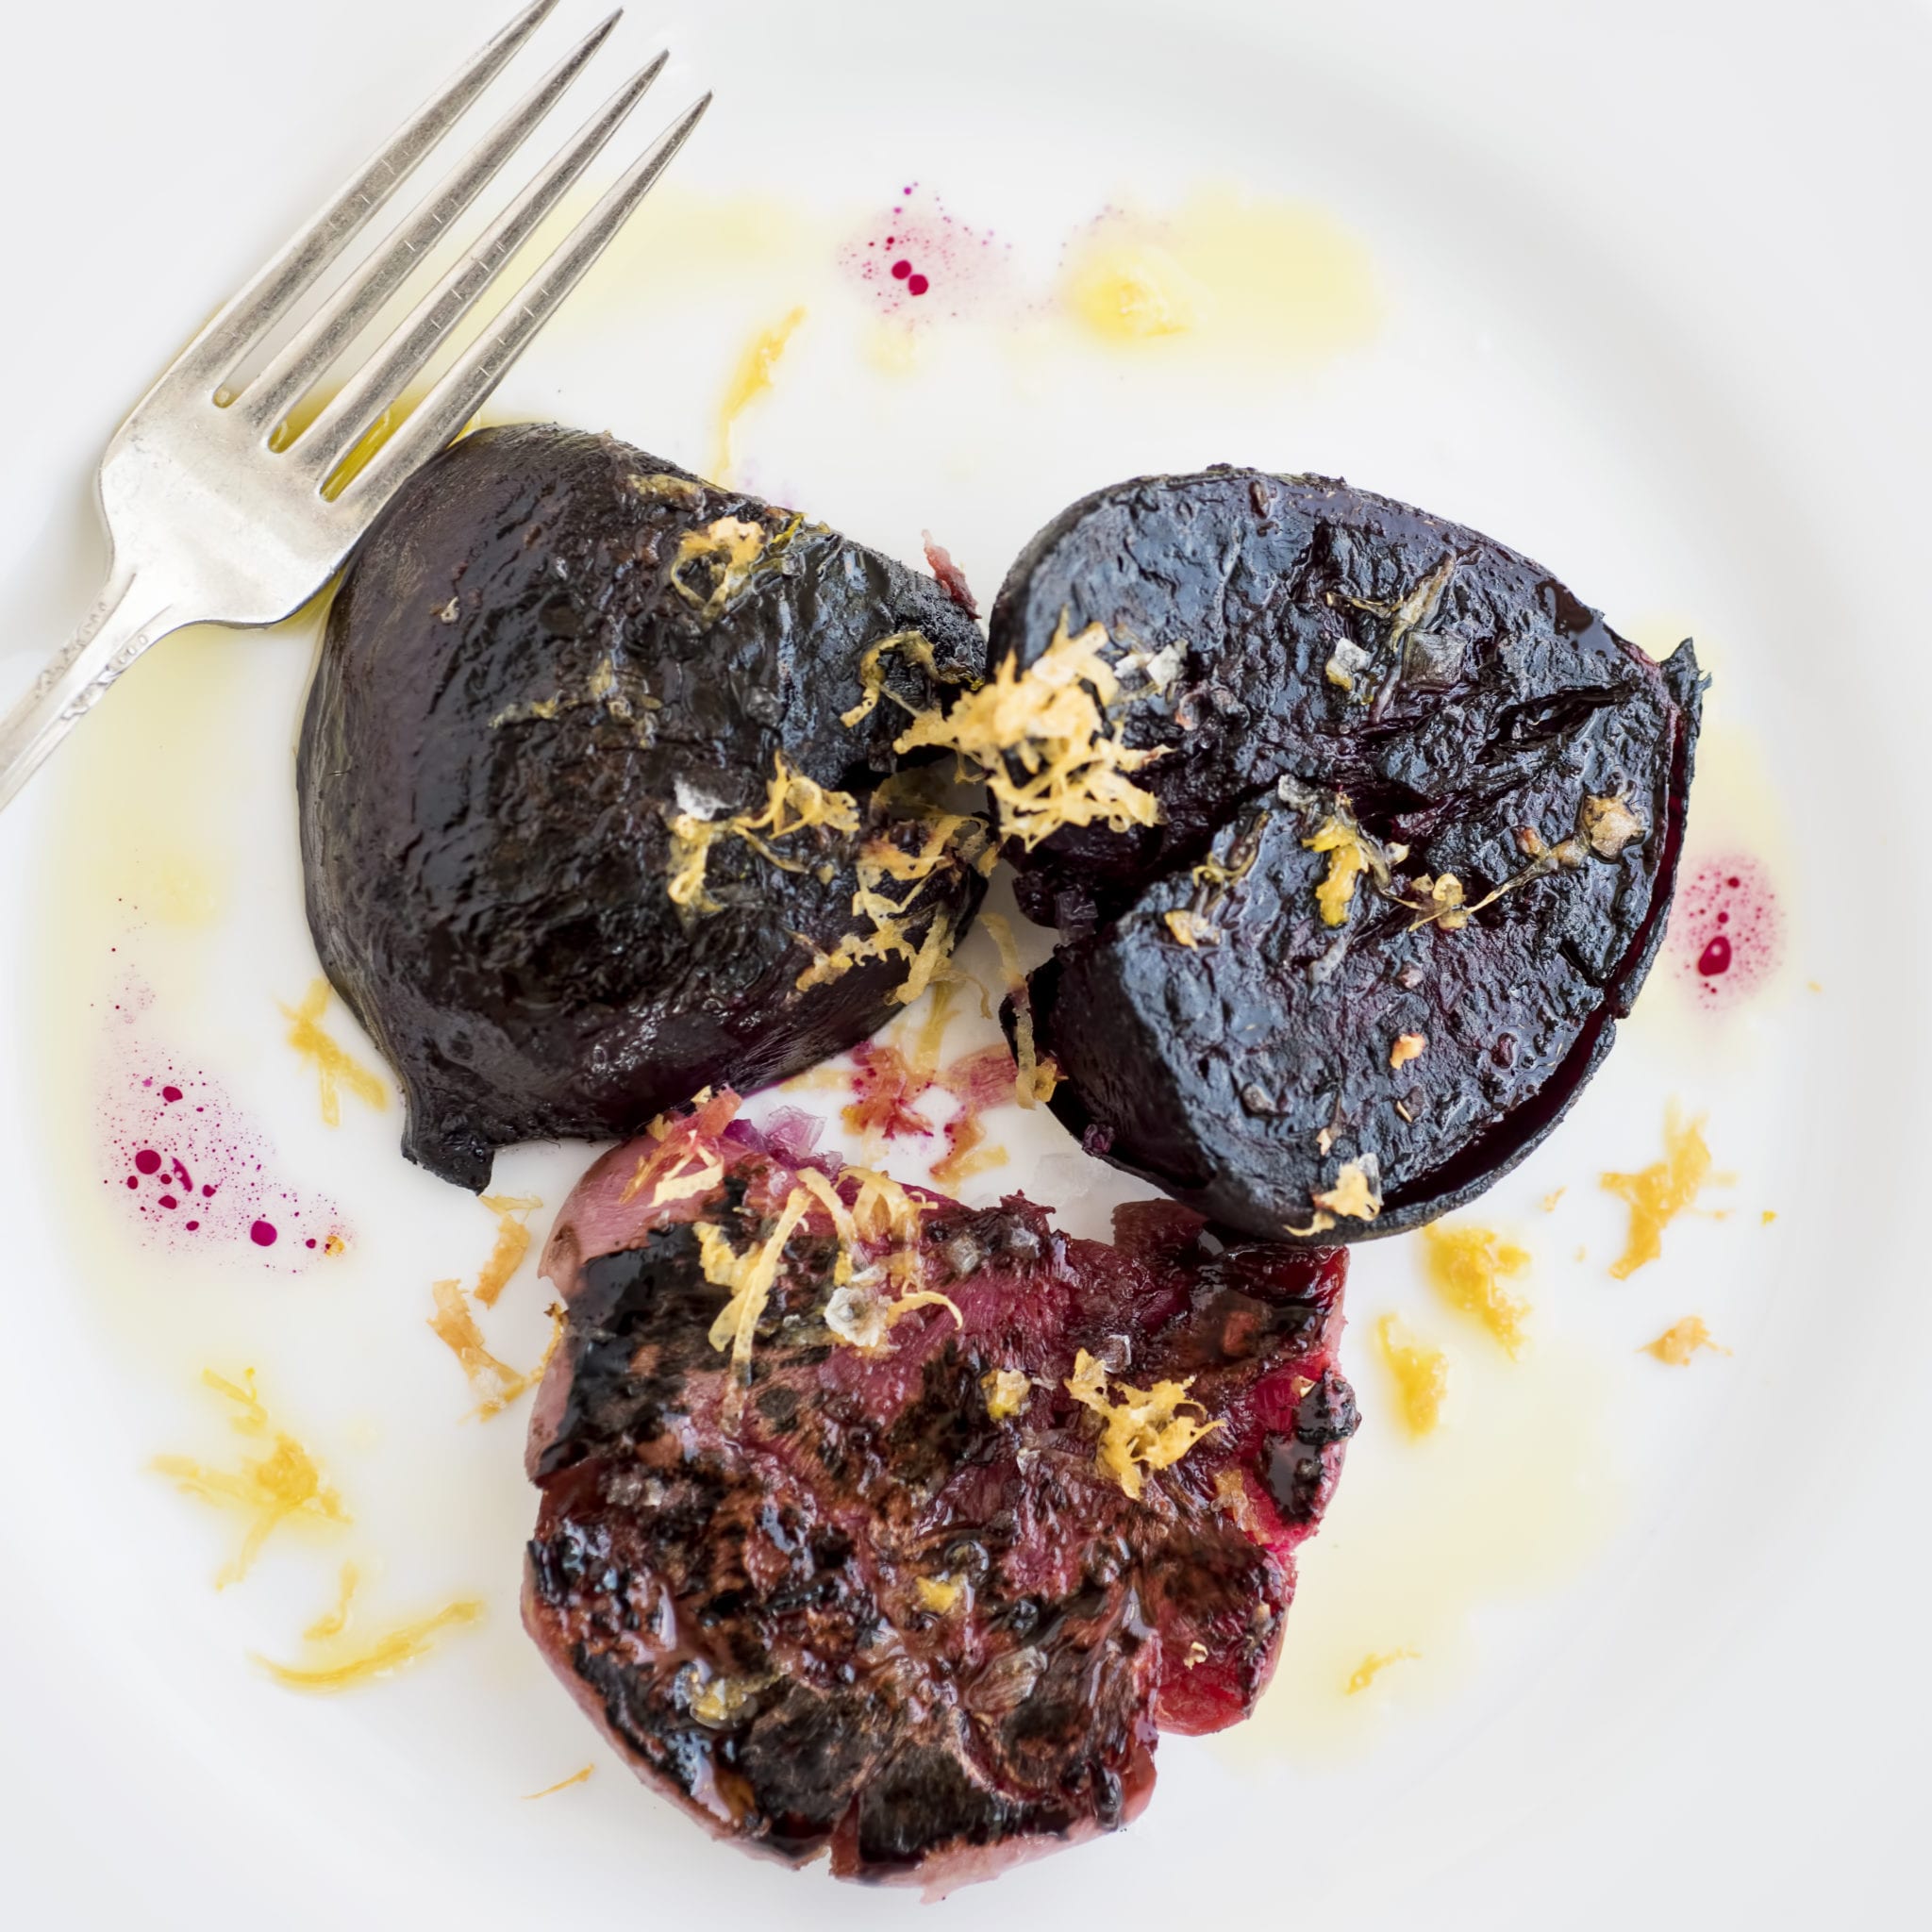 CHARRED BEETS, GRAPEFRUIT, AND OLIVE OIL